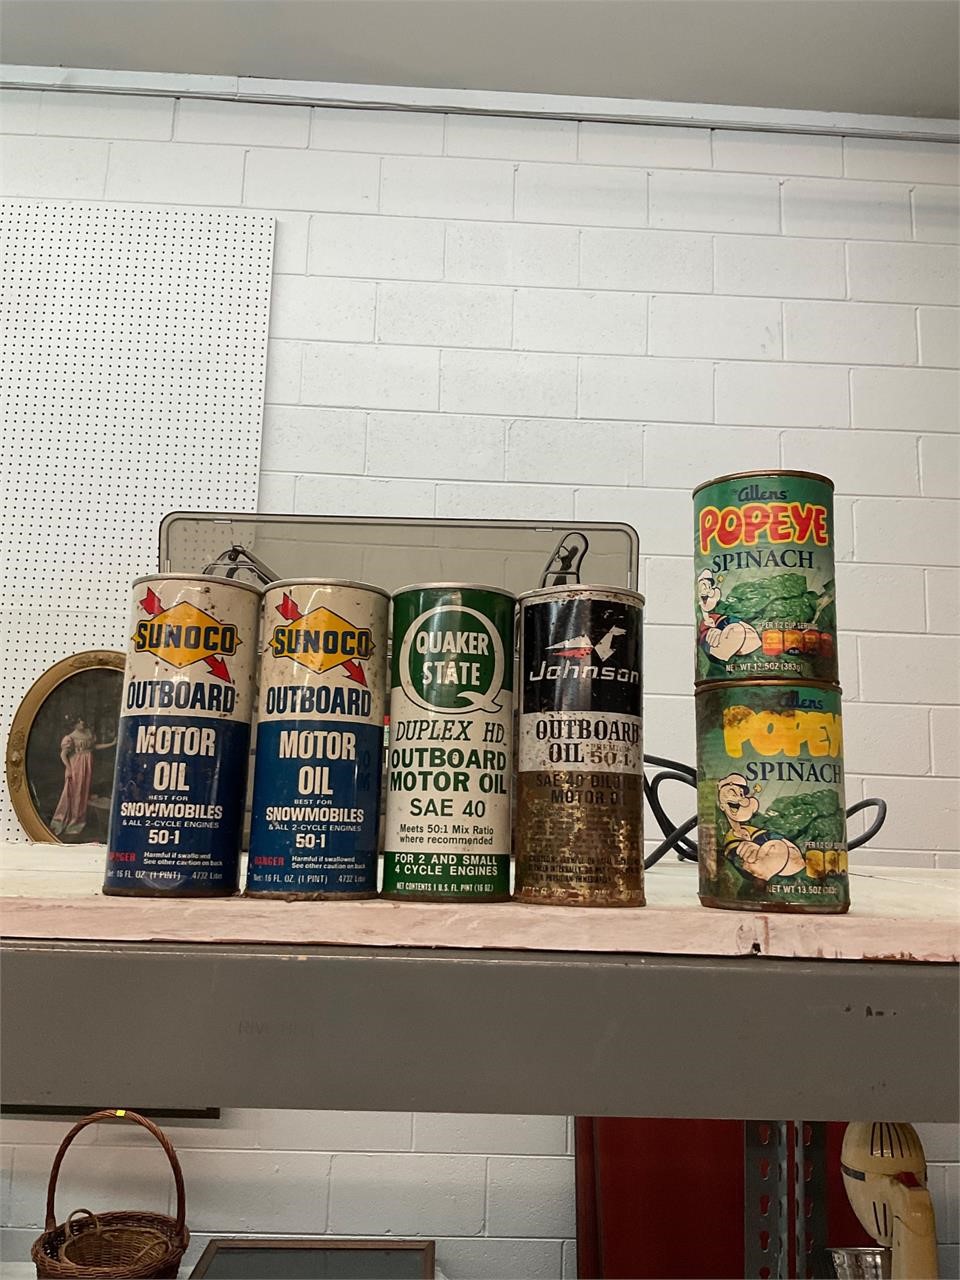 Vintage Outboard Motor Oil Cans and Popeyes